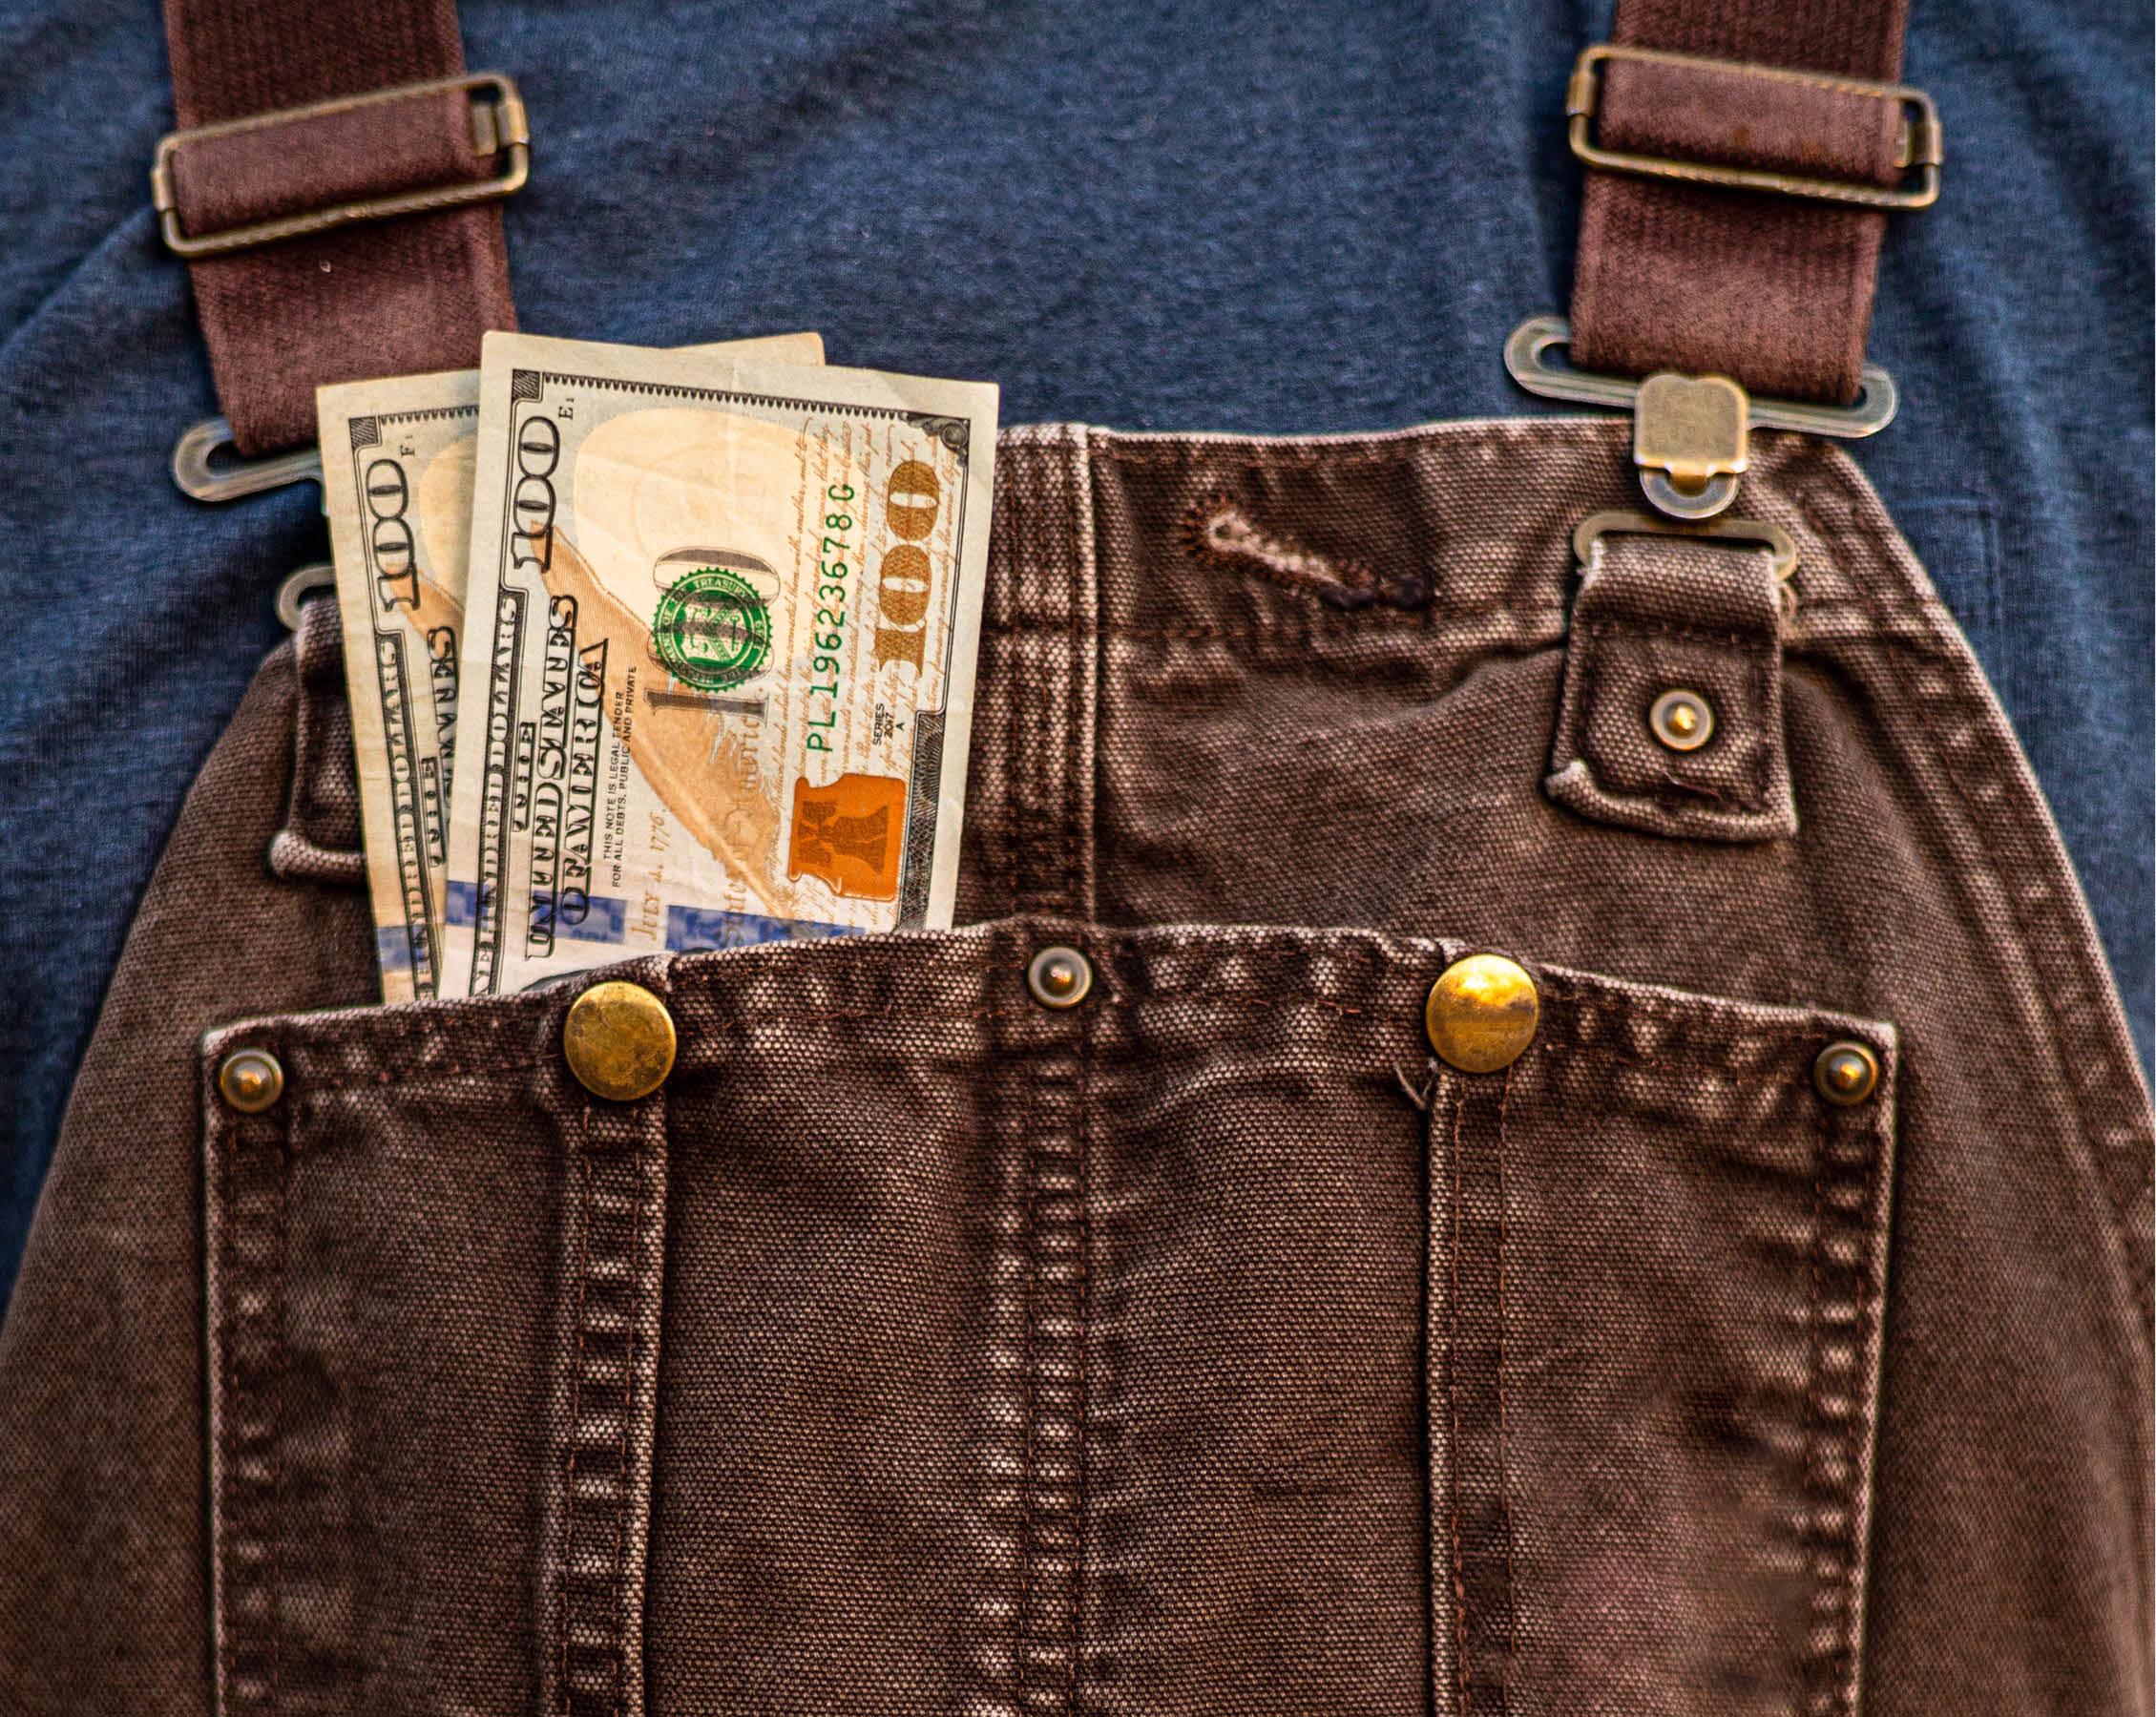 Two $100 bills stick out of pocket of brown overalls.